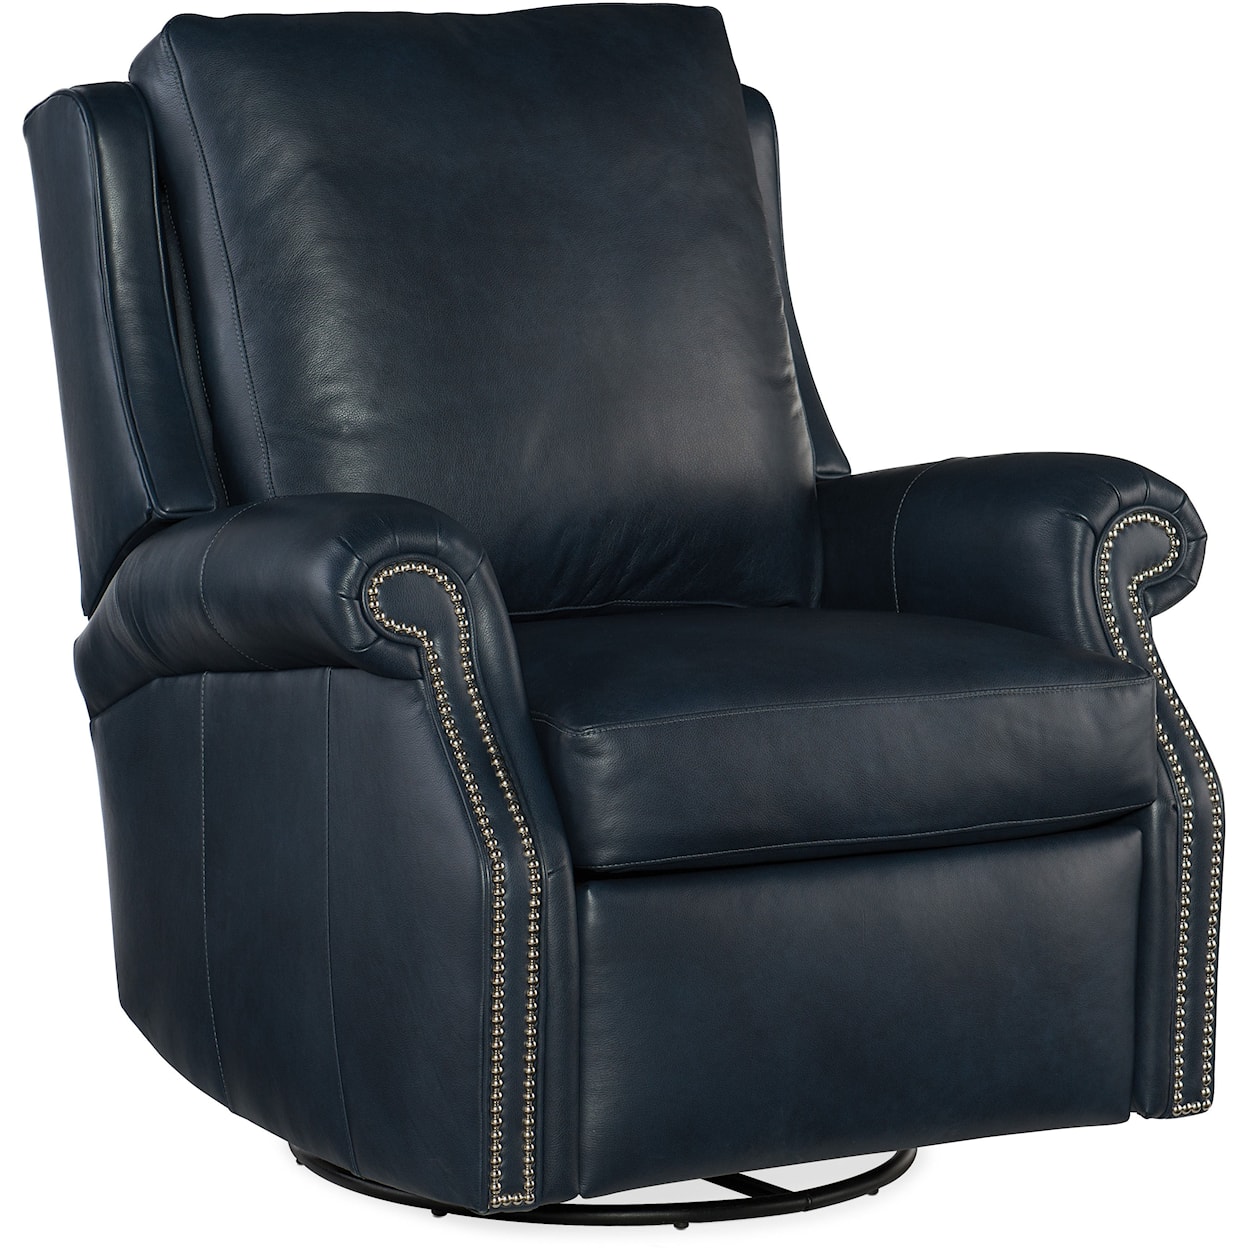 Bradington Young Chairs That Recline Power Recliner